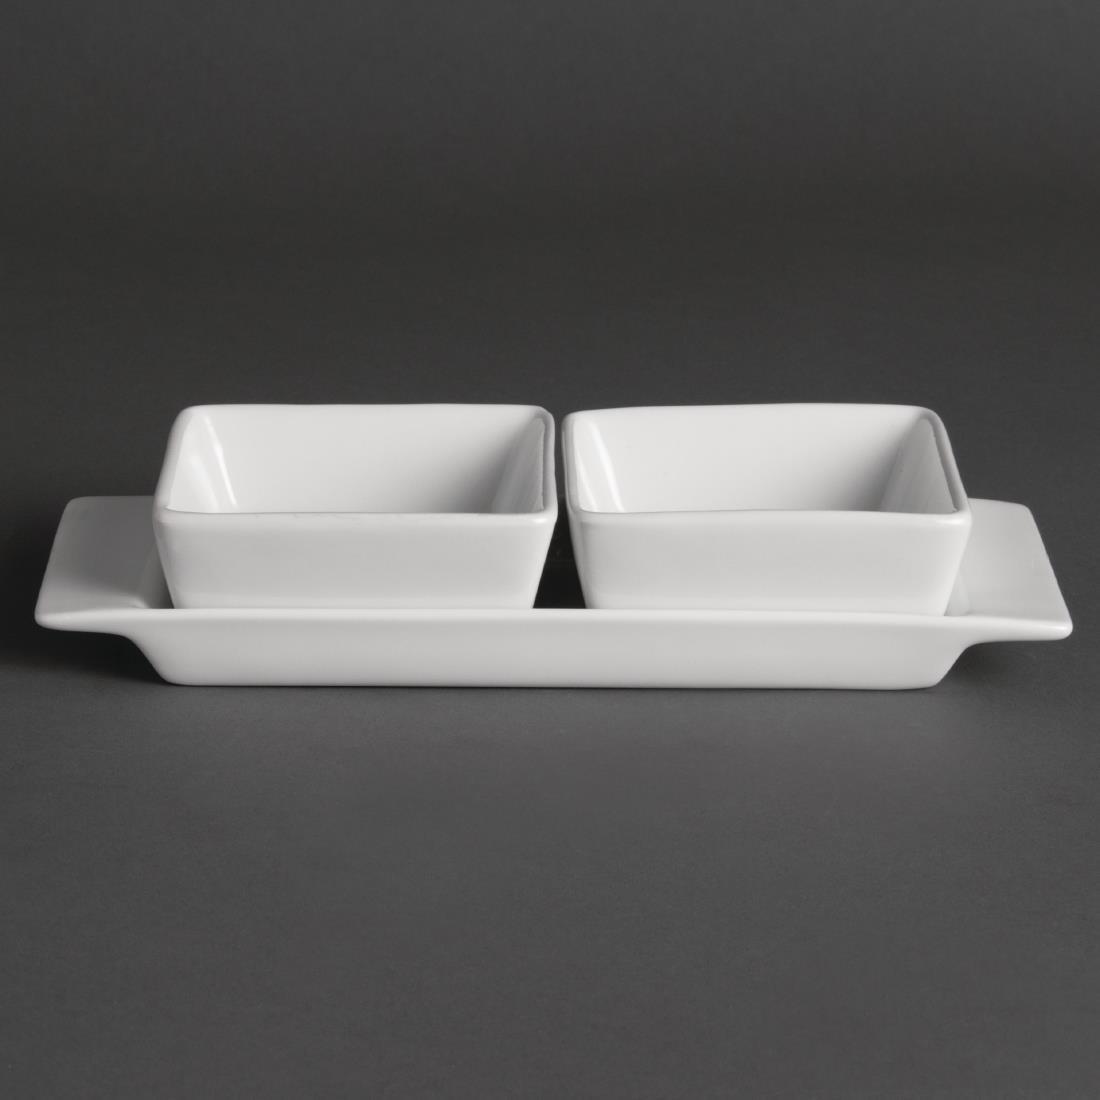 Olympia Whiteware Snack Dishes with Plates 2 Section (Pack of 2) - U815  - 2